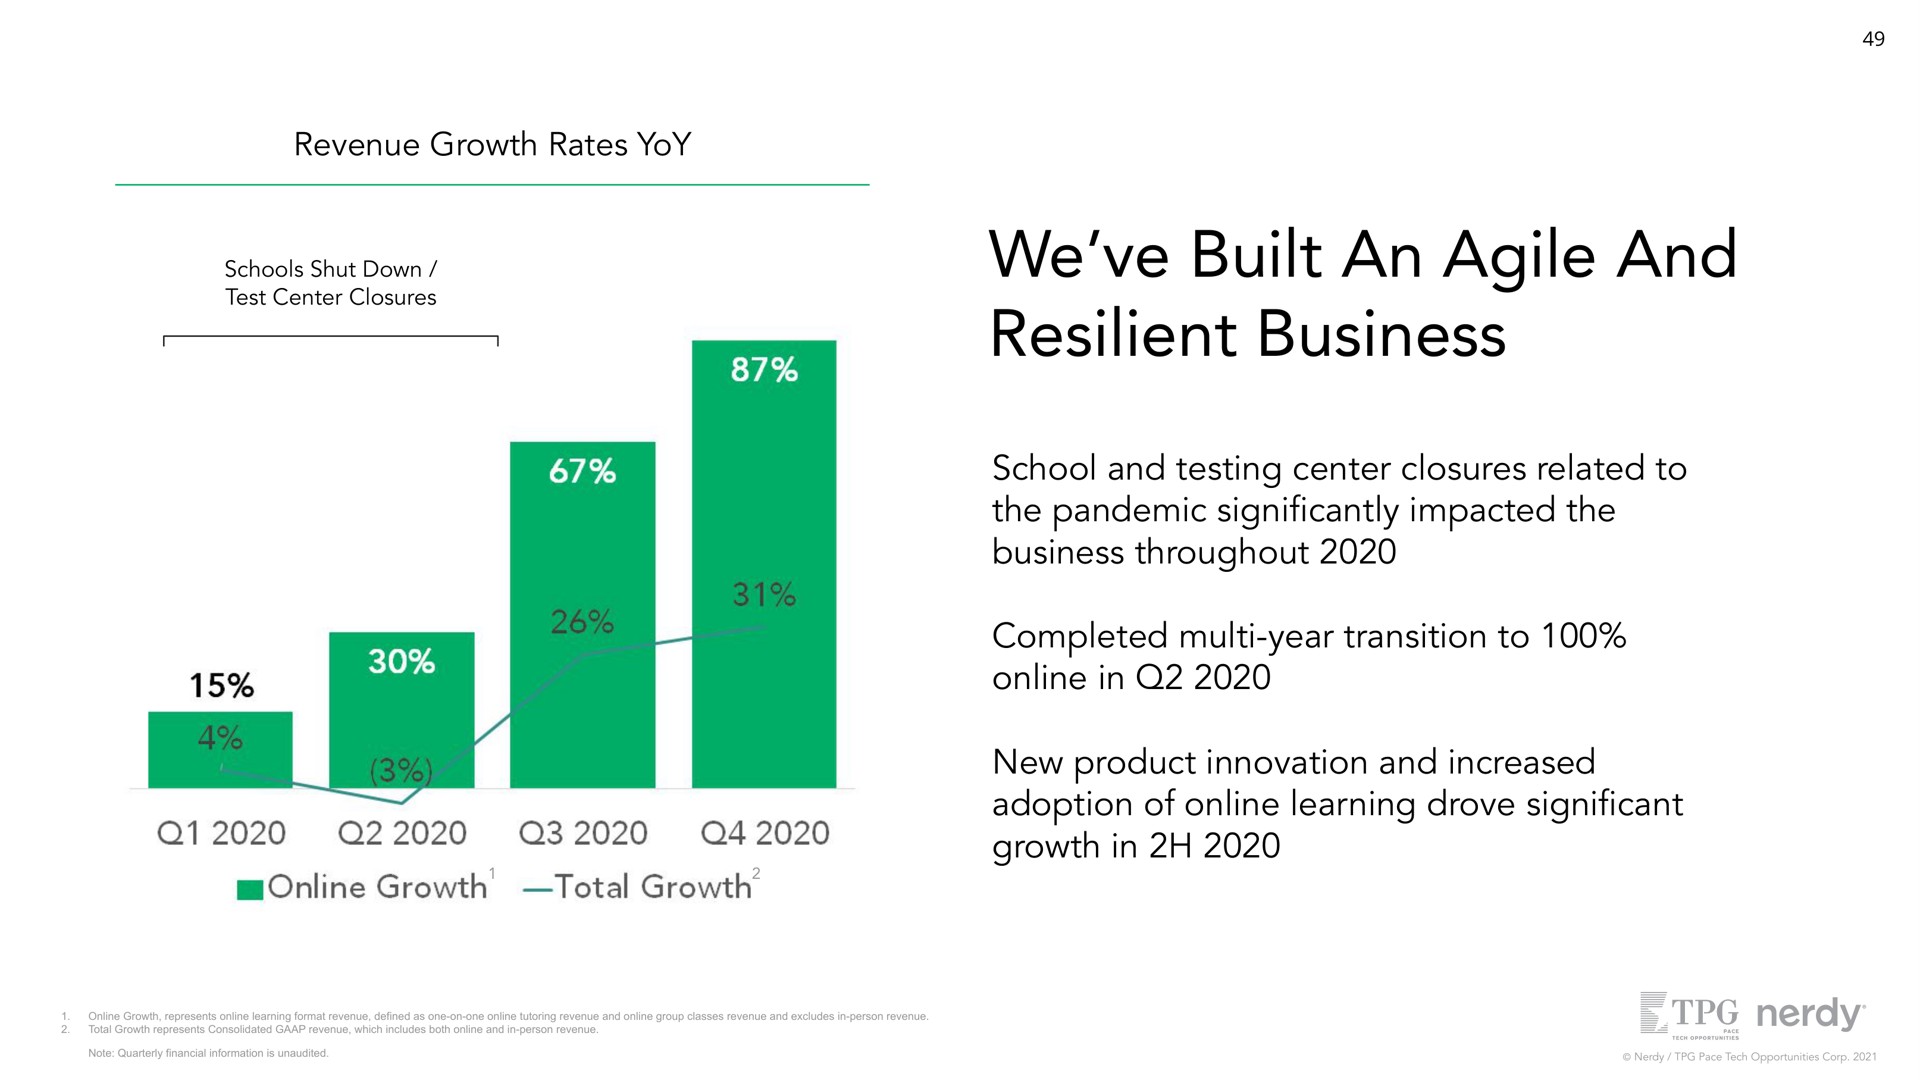 revenue growth rates yoy we built an agile and resilient business school and testing center closures related to the pandemic impacted the business throughout completed year transition to in new product innovation and increased adoption of learning drove cant growth in a | Nerdy